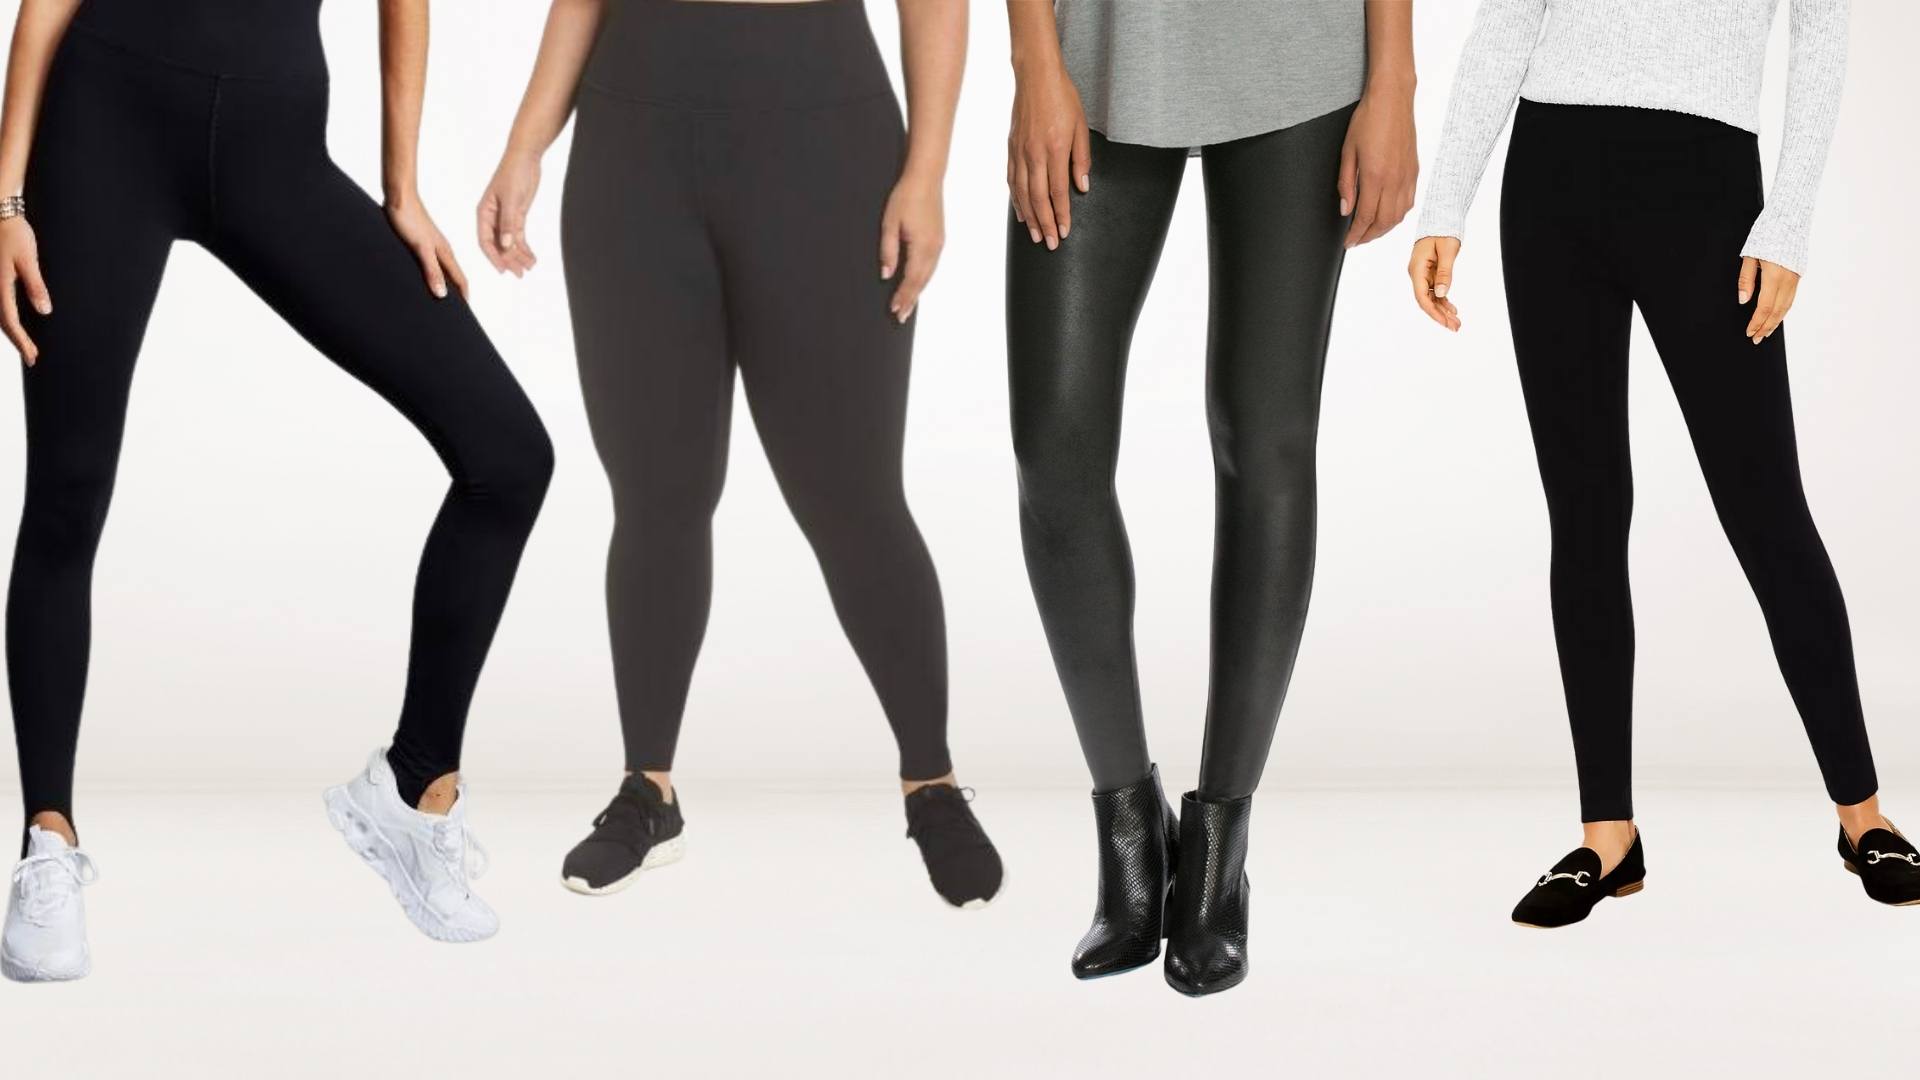 What Color Leggings To Wear With Black Dress? – solowomen